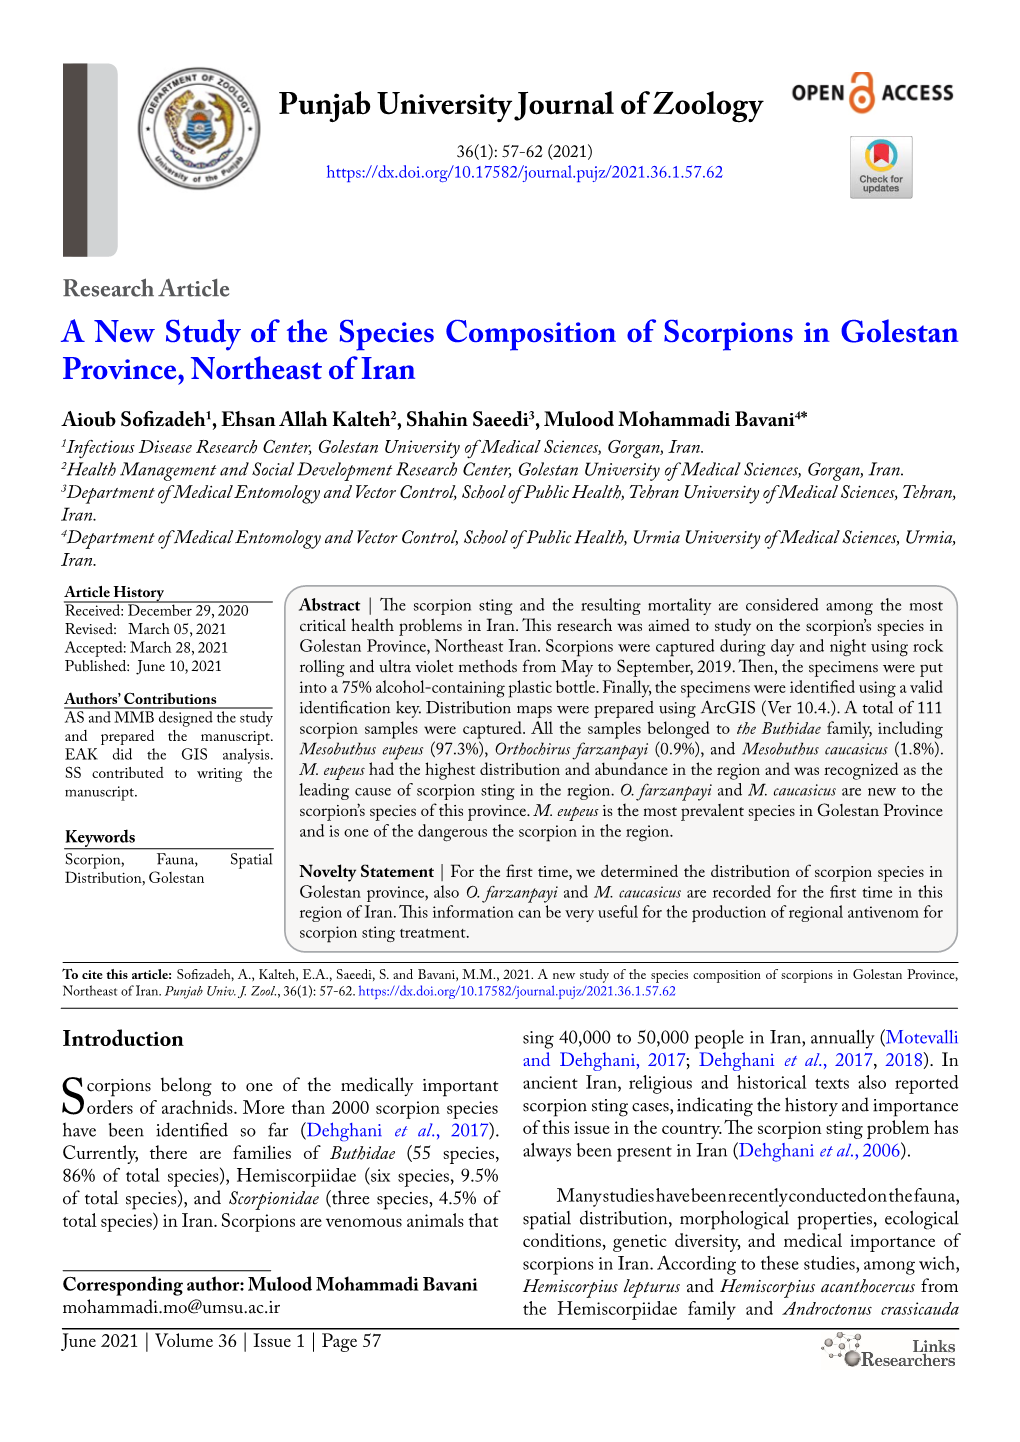 A New Study of the Species Composition of Scorpions In